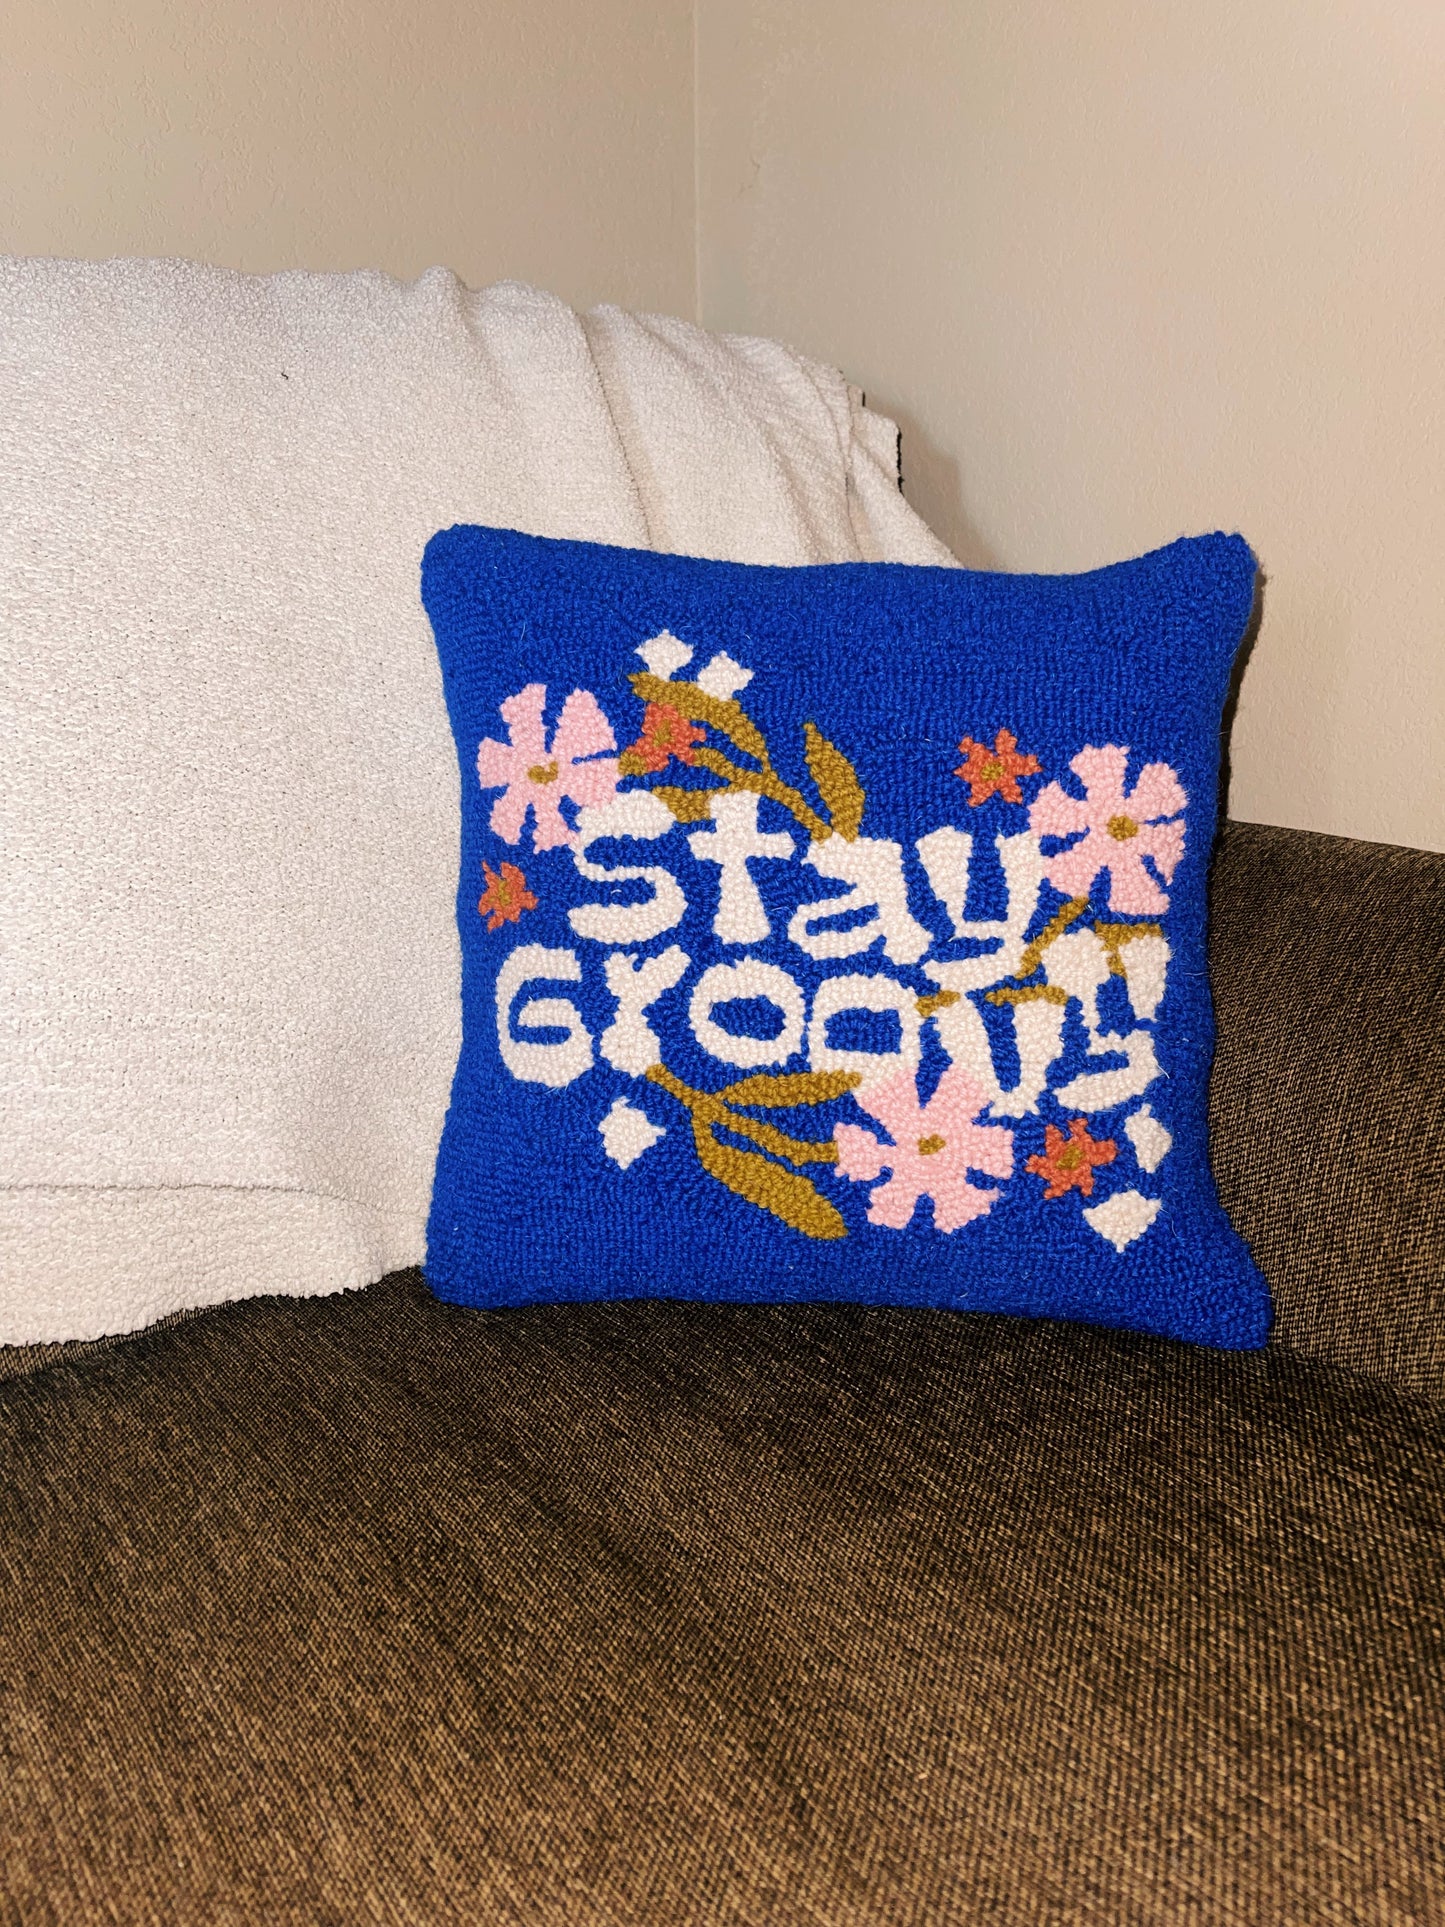 stay groovy throw pillow